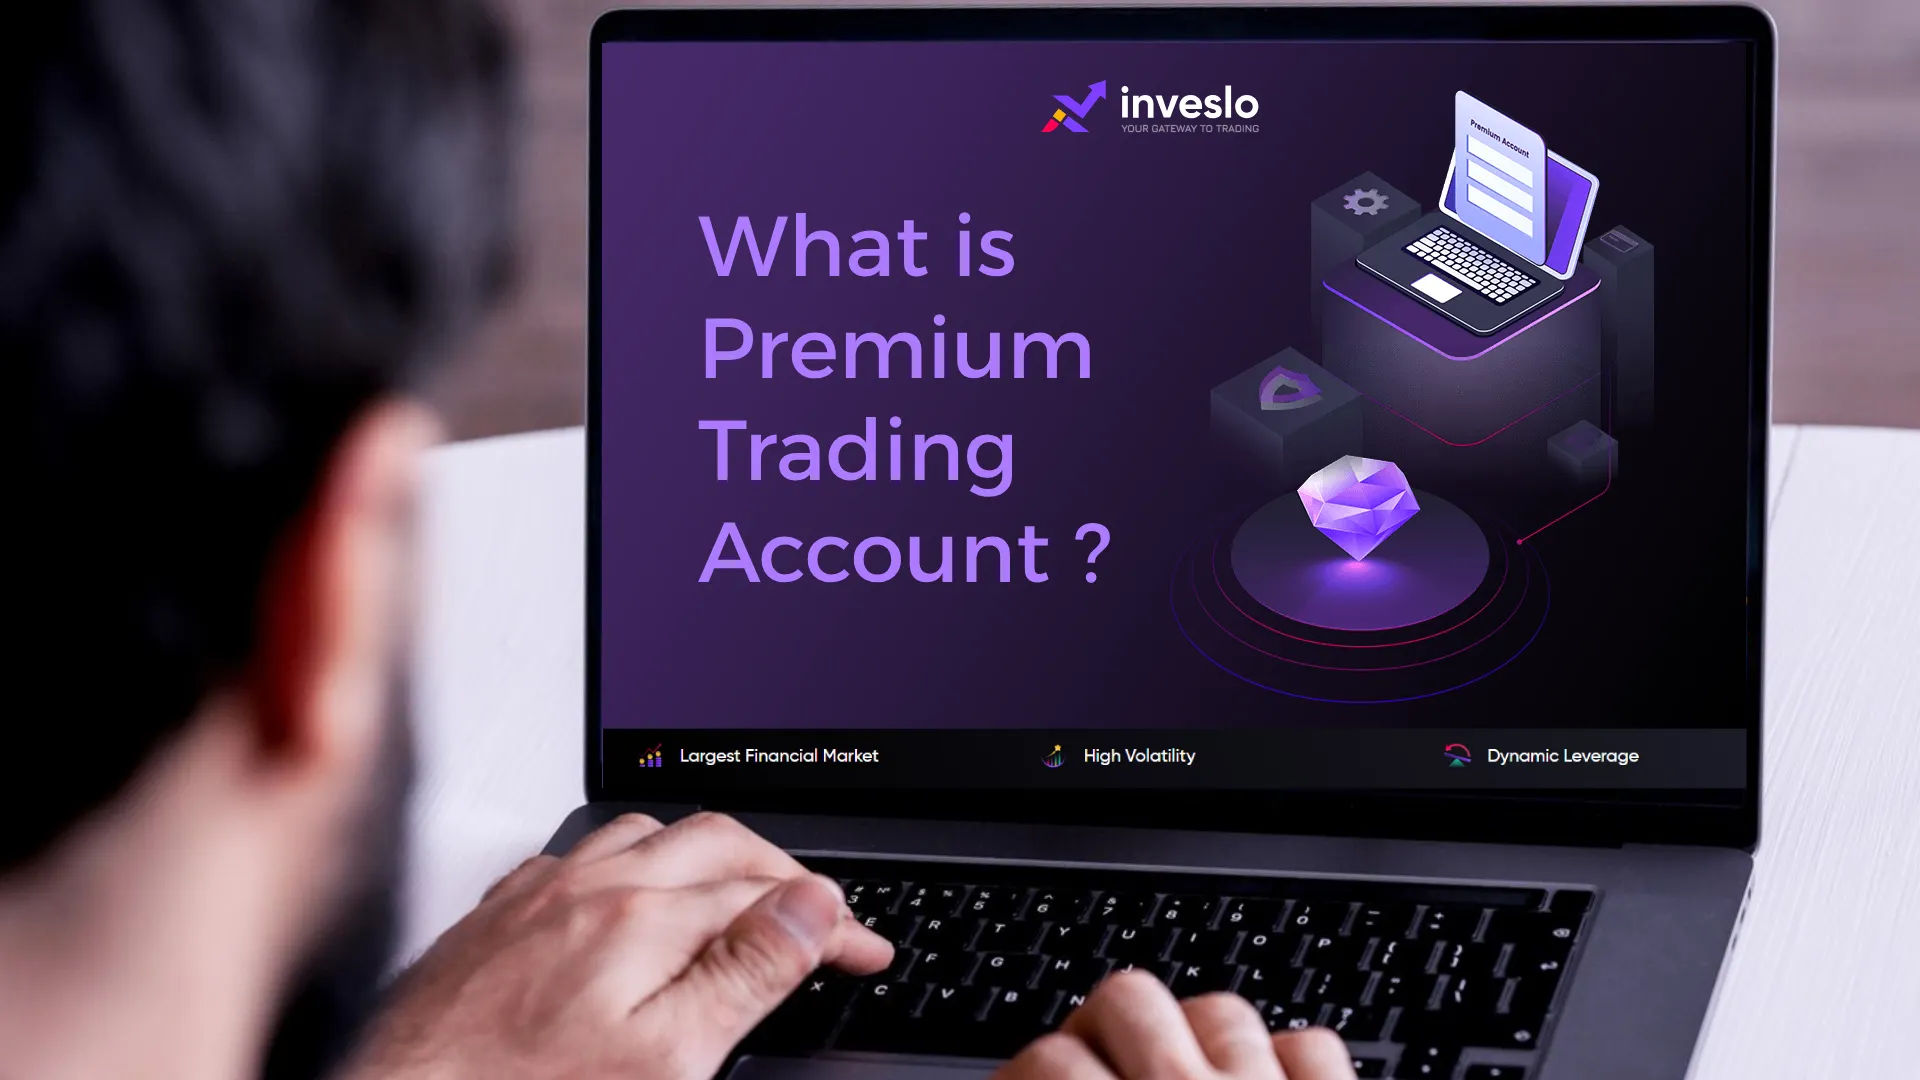 What is Premium Trading Account